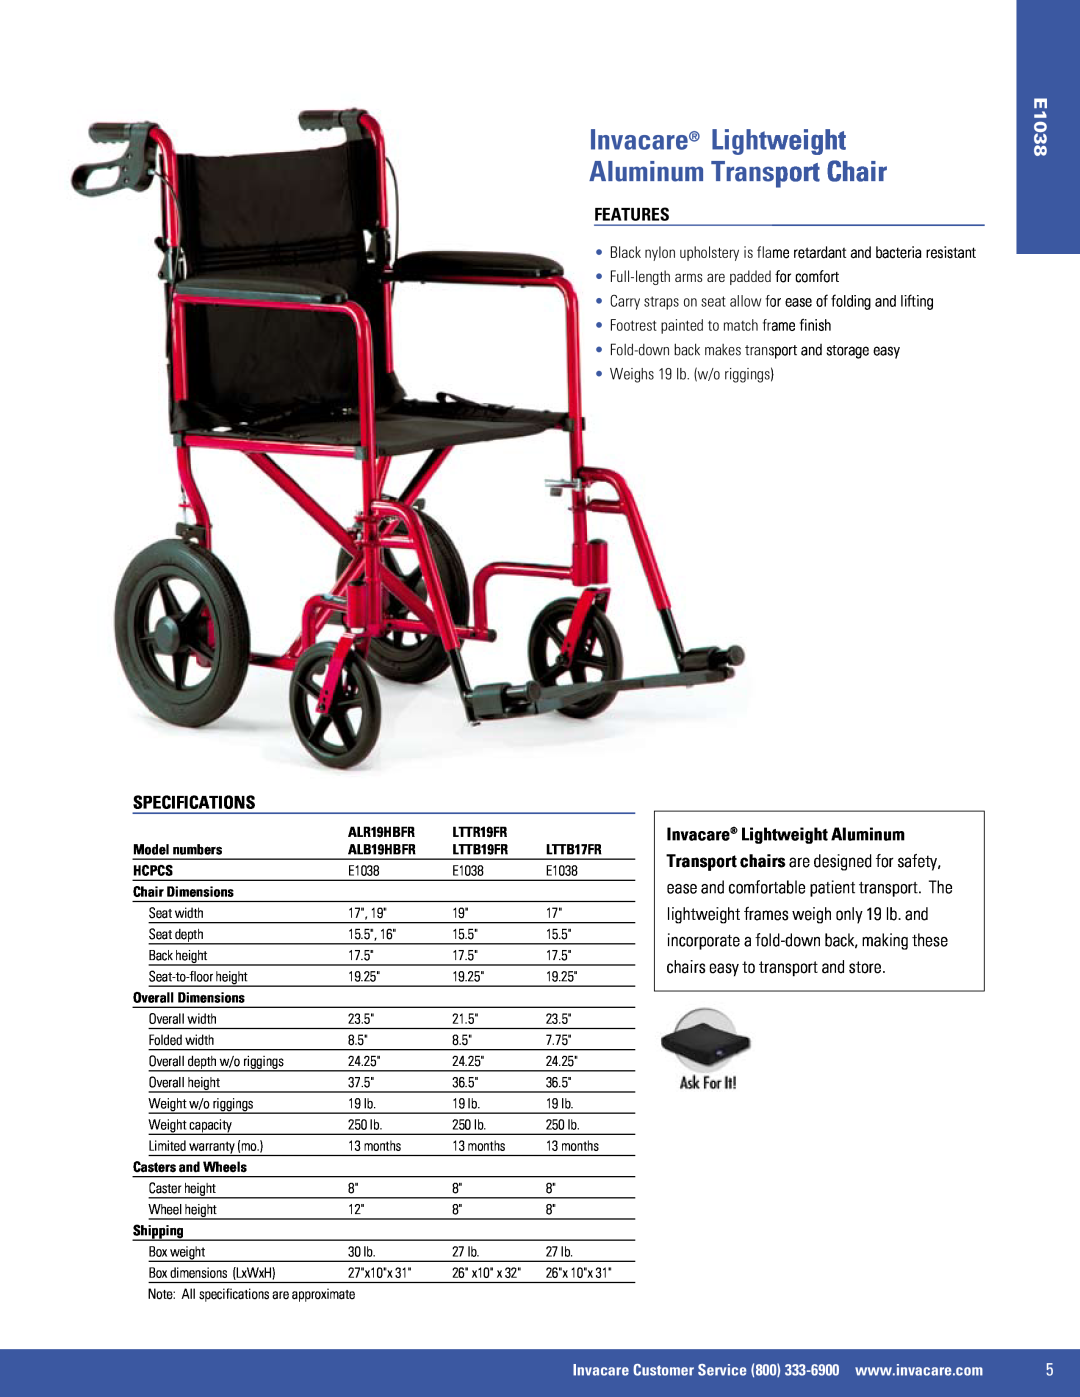 Invacare 9000 SL, 9000 XT, SX5, EX2 manual Invacare Lightweight Aluminum Transport Chair, Features, E1038, Specifications 